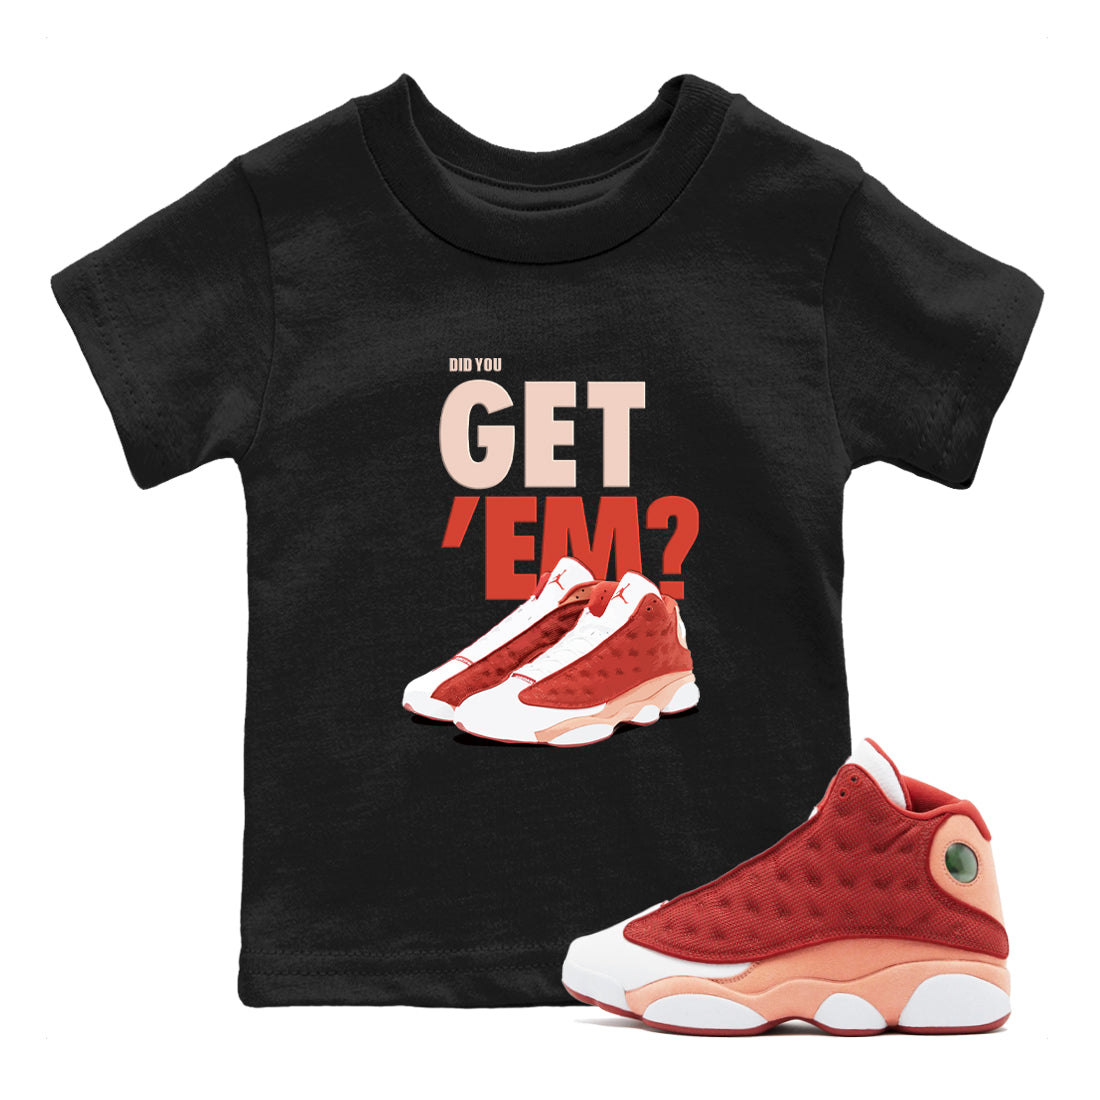 13s Dune Red shirts to match jordans Did You Get 'Em sneaker match tees Air Jordan 13 Dune Red SNRT Sneaker Tees streetwear brand Baby and Youth Black 1 cotton tee